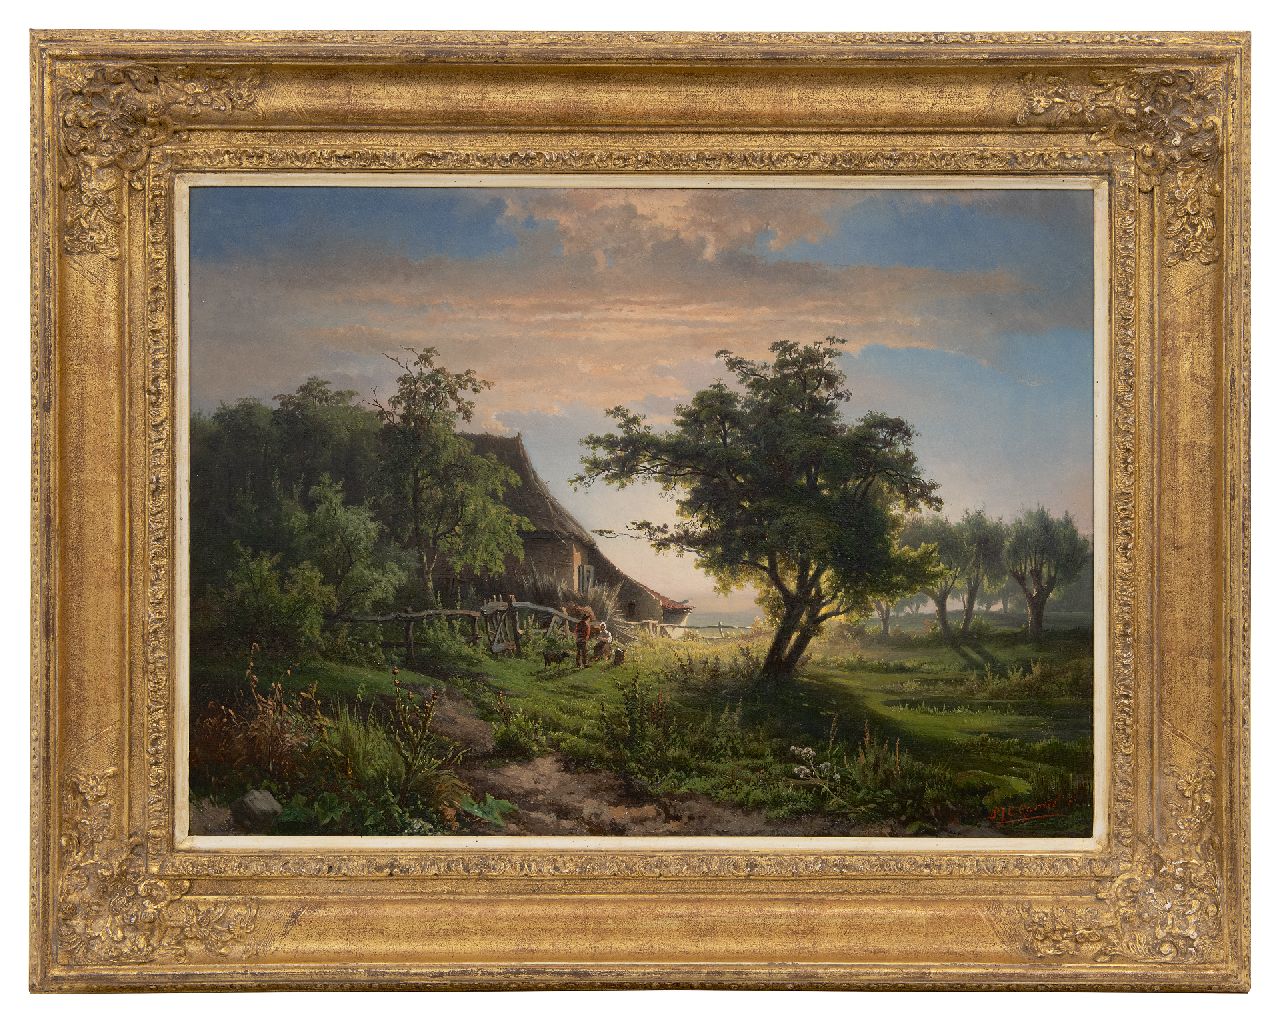 Gabriel P.J.C.  | Paul Joseph Constantin 'Constan(t)' Gabriel | Paintings offered for sale | Landscape with farm at sunset, oil on canvas 45.5 x 63.0 cm, signed l.r. and to be dated ca. 1855